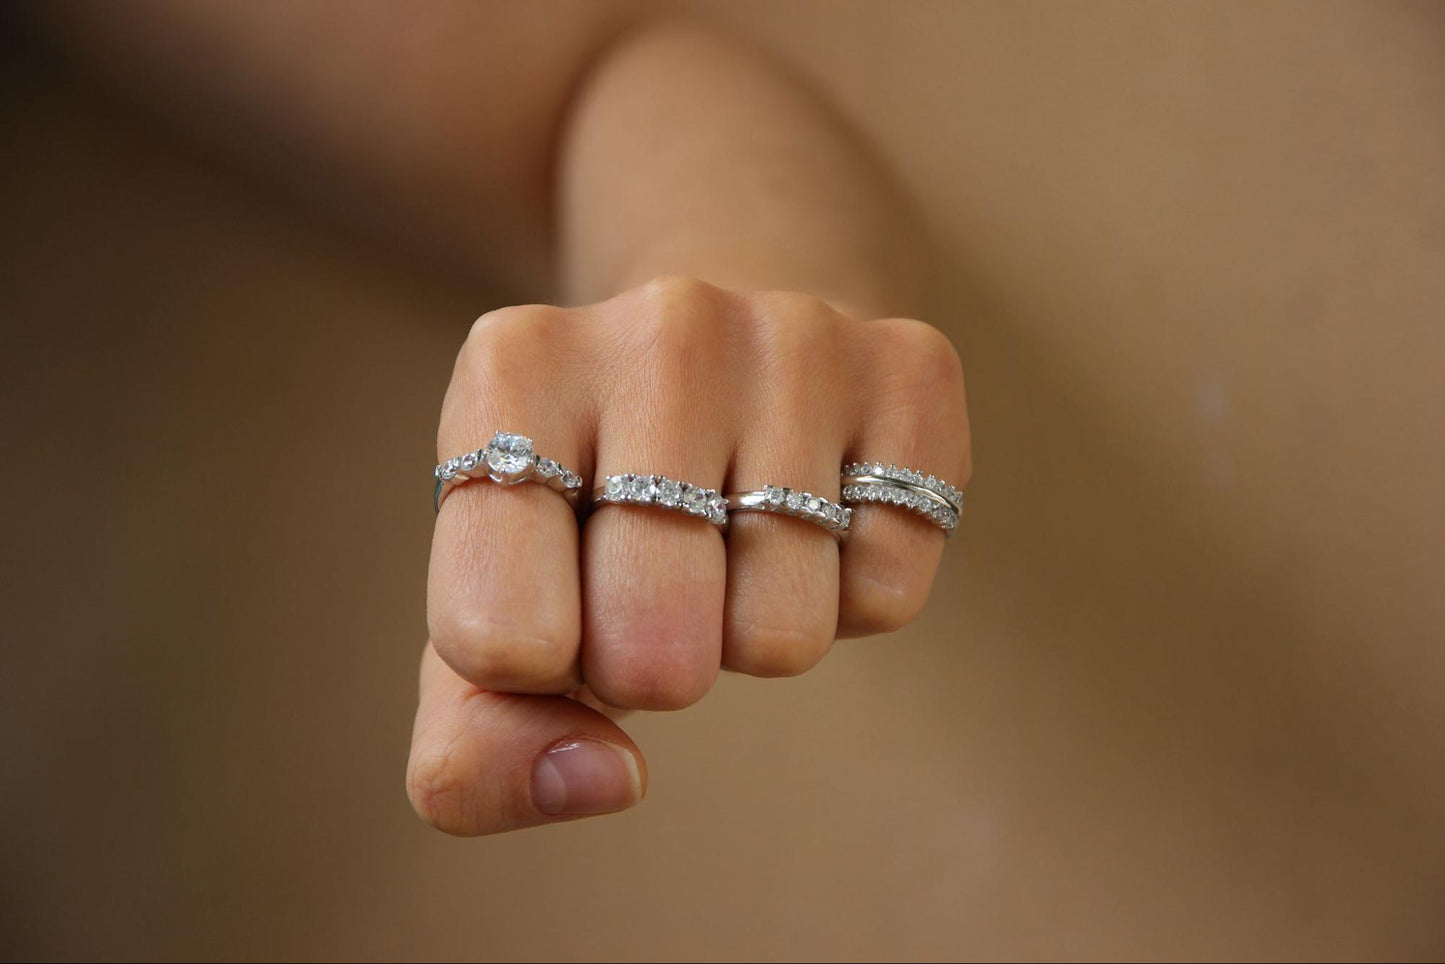 Photo of a hand with a diamond ring on each finger